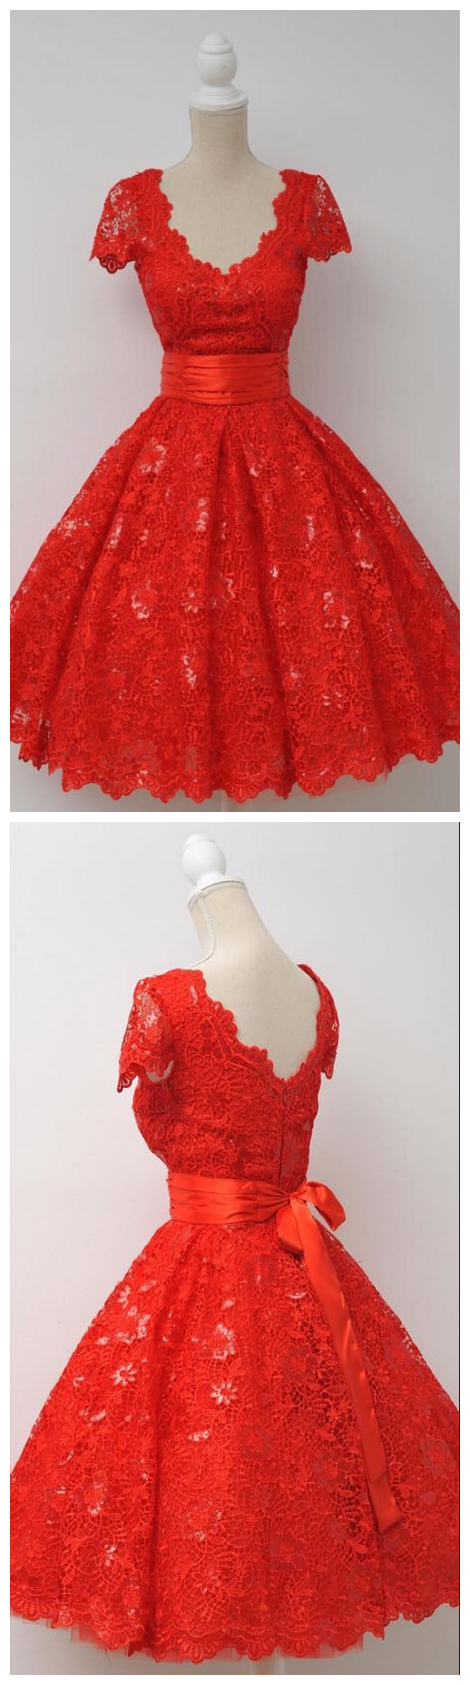 Homecoming Dresses,junior Homecoming Dresses,red Lace Homecoming Dress ...